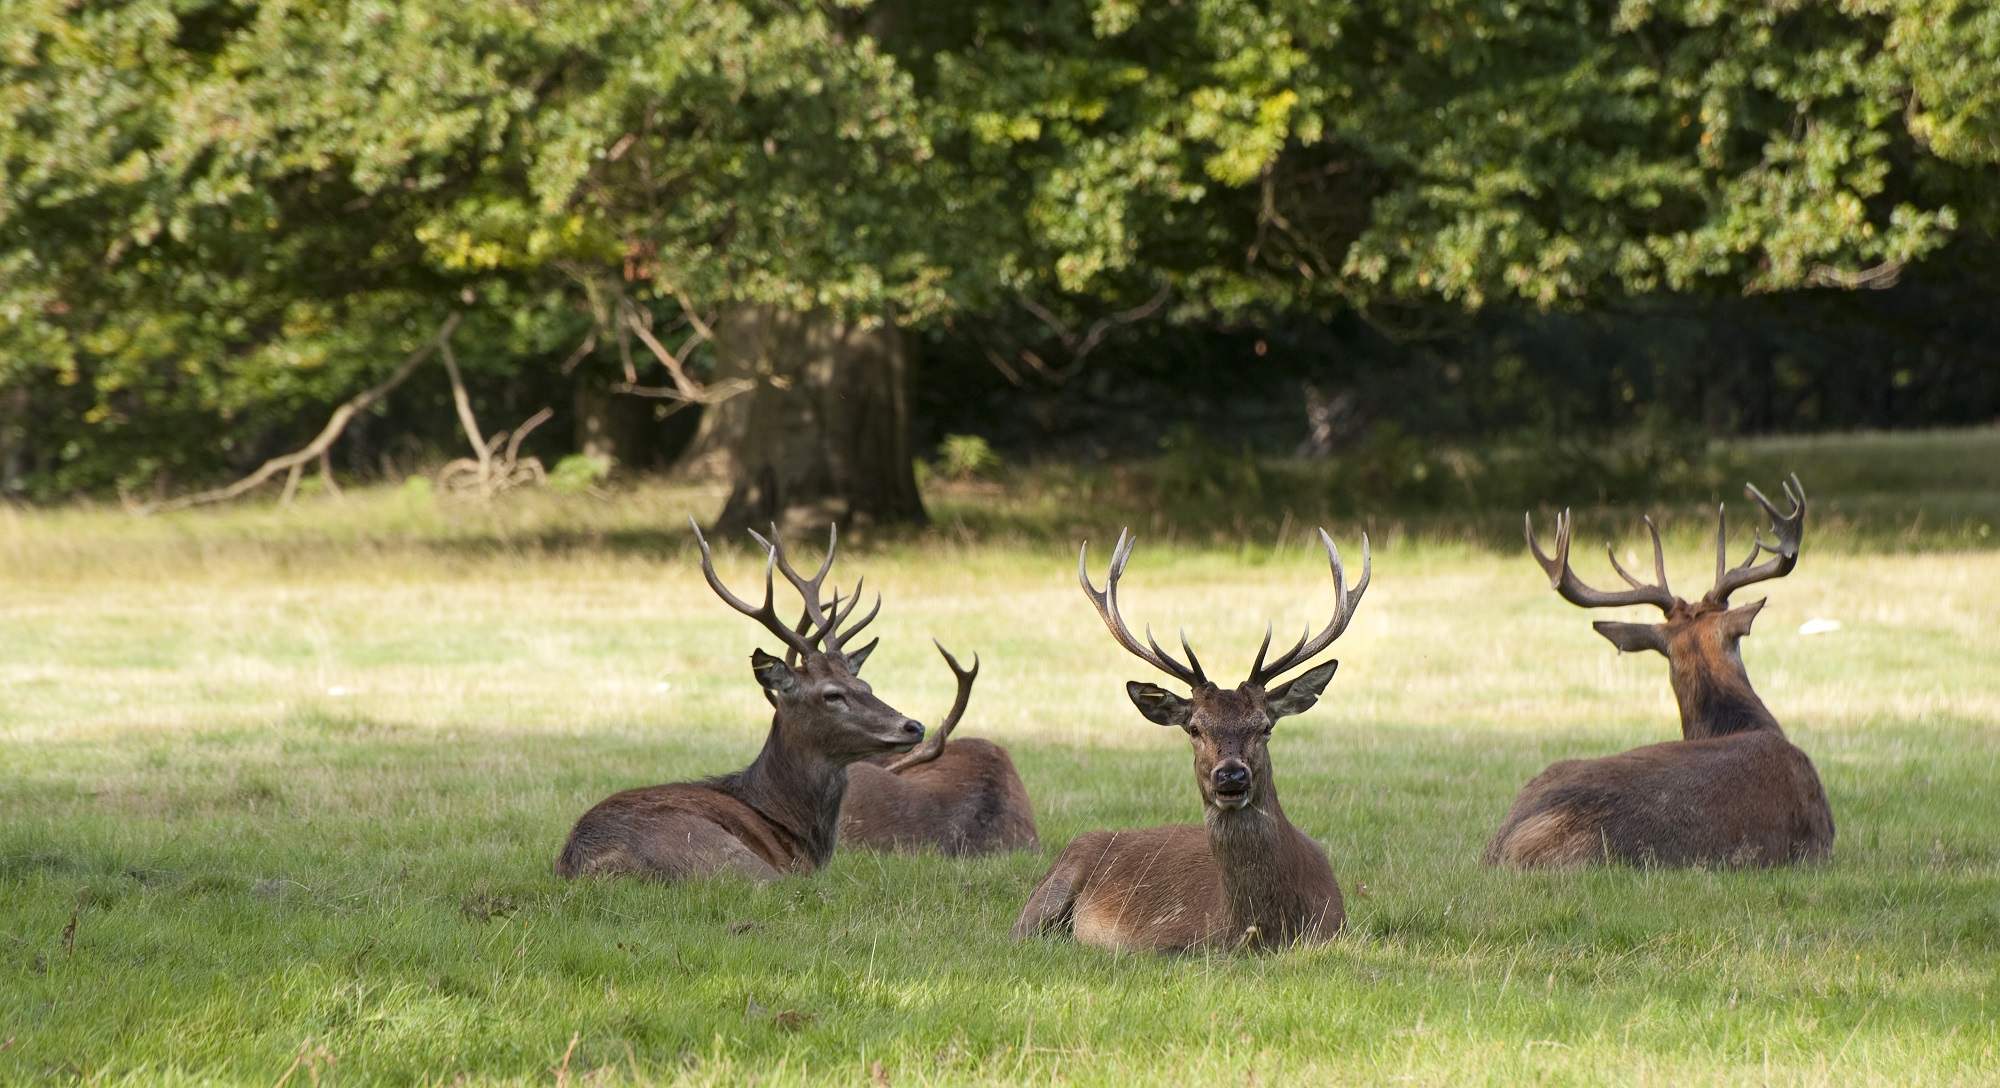 Four stags lying on the grass with trees in the background.